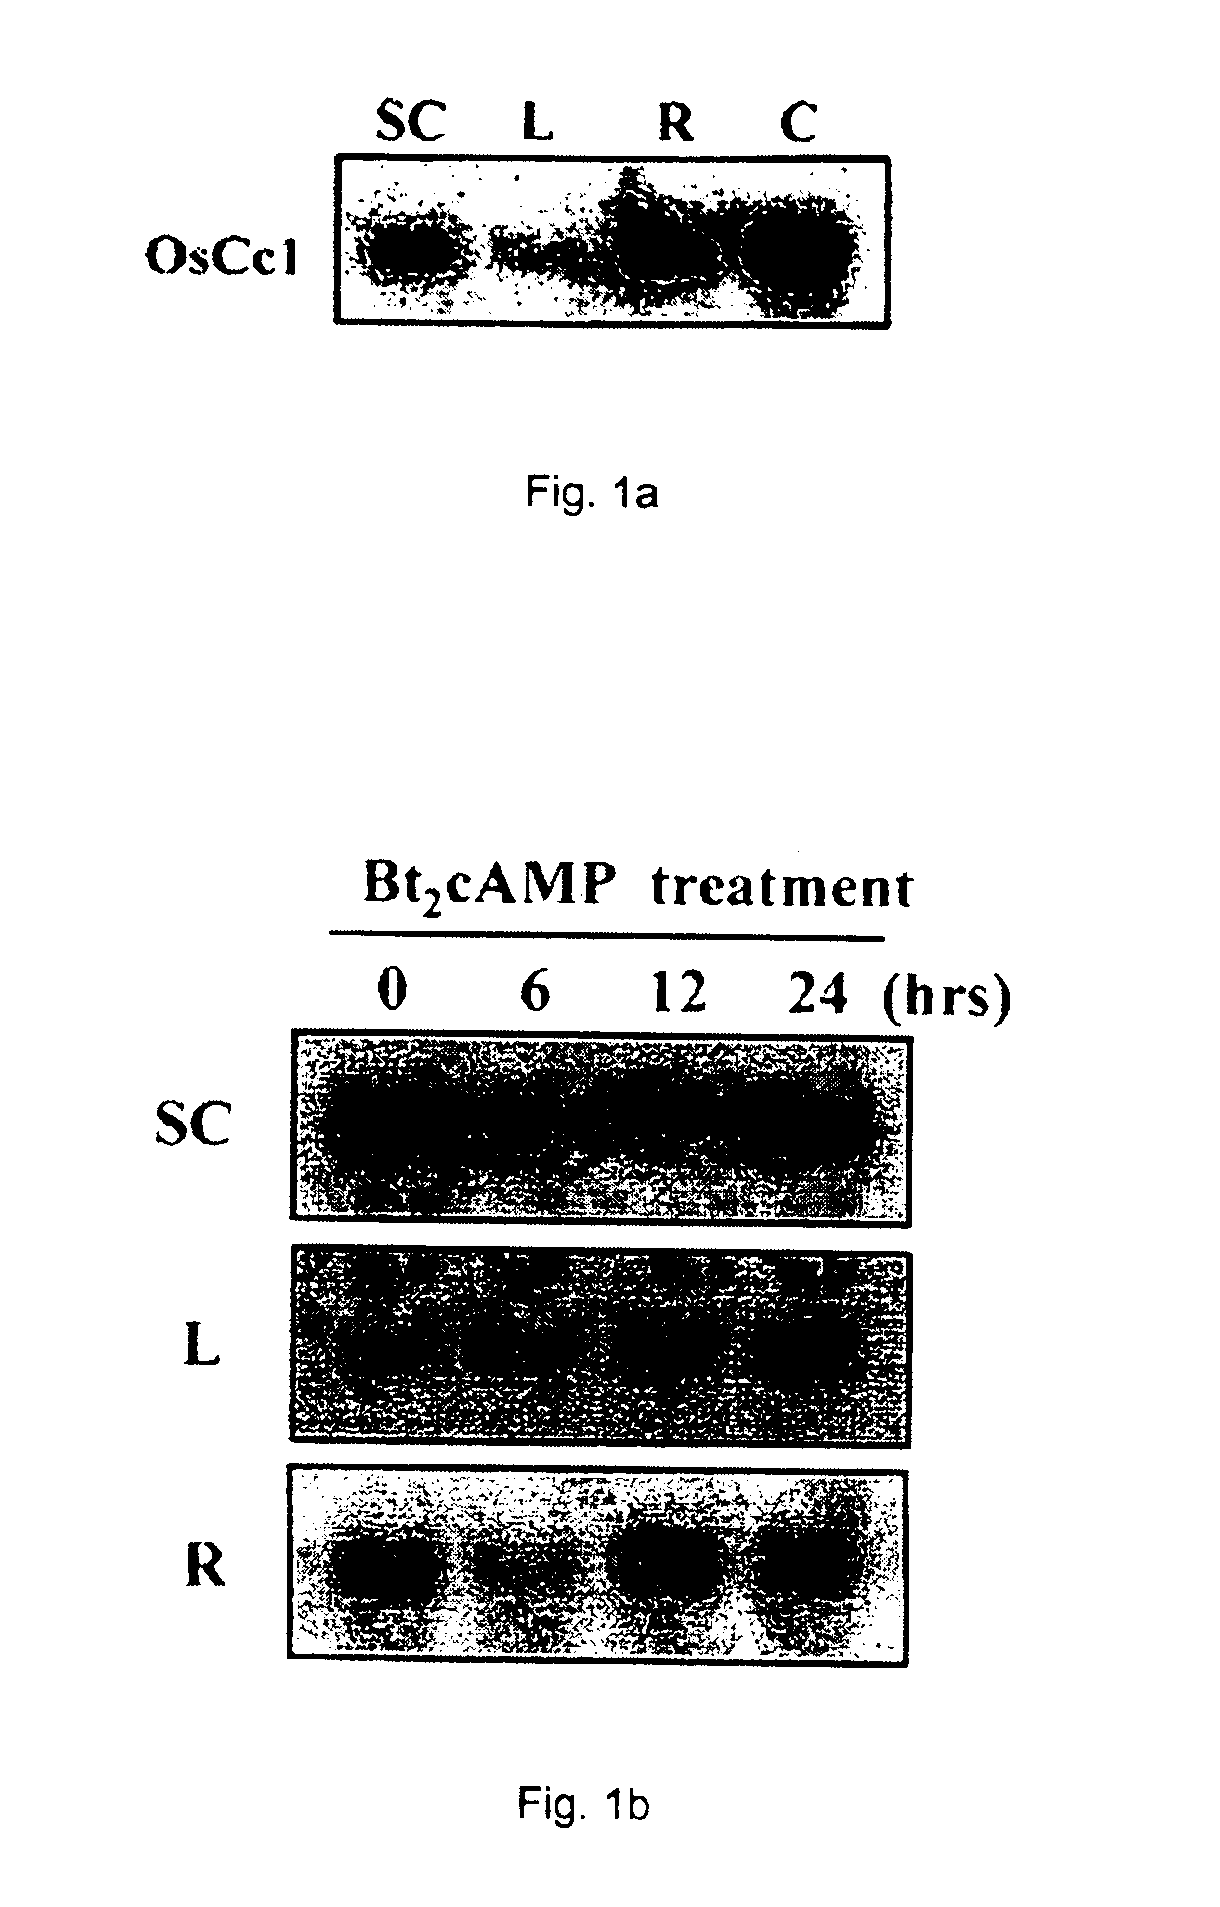 OsCc1 promoter and methods of transforming monocot plants using the same